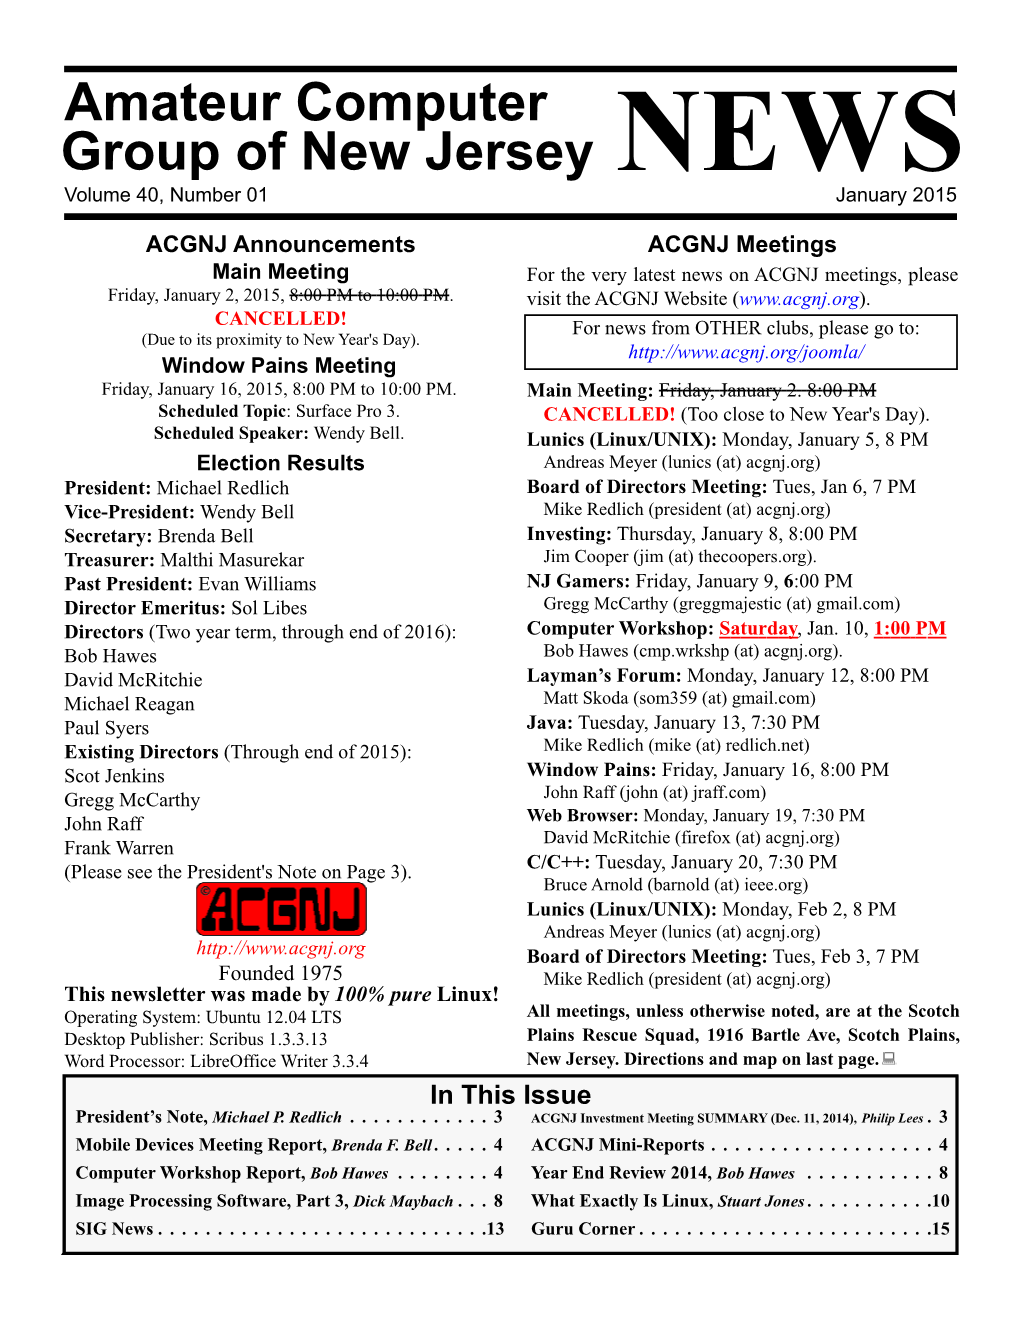 Amateur Computer Group of New Jersey NEWS Volume 40, Number 01 January 2015